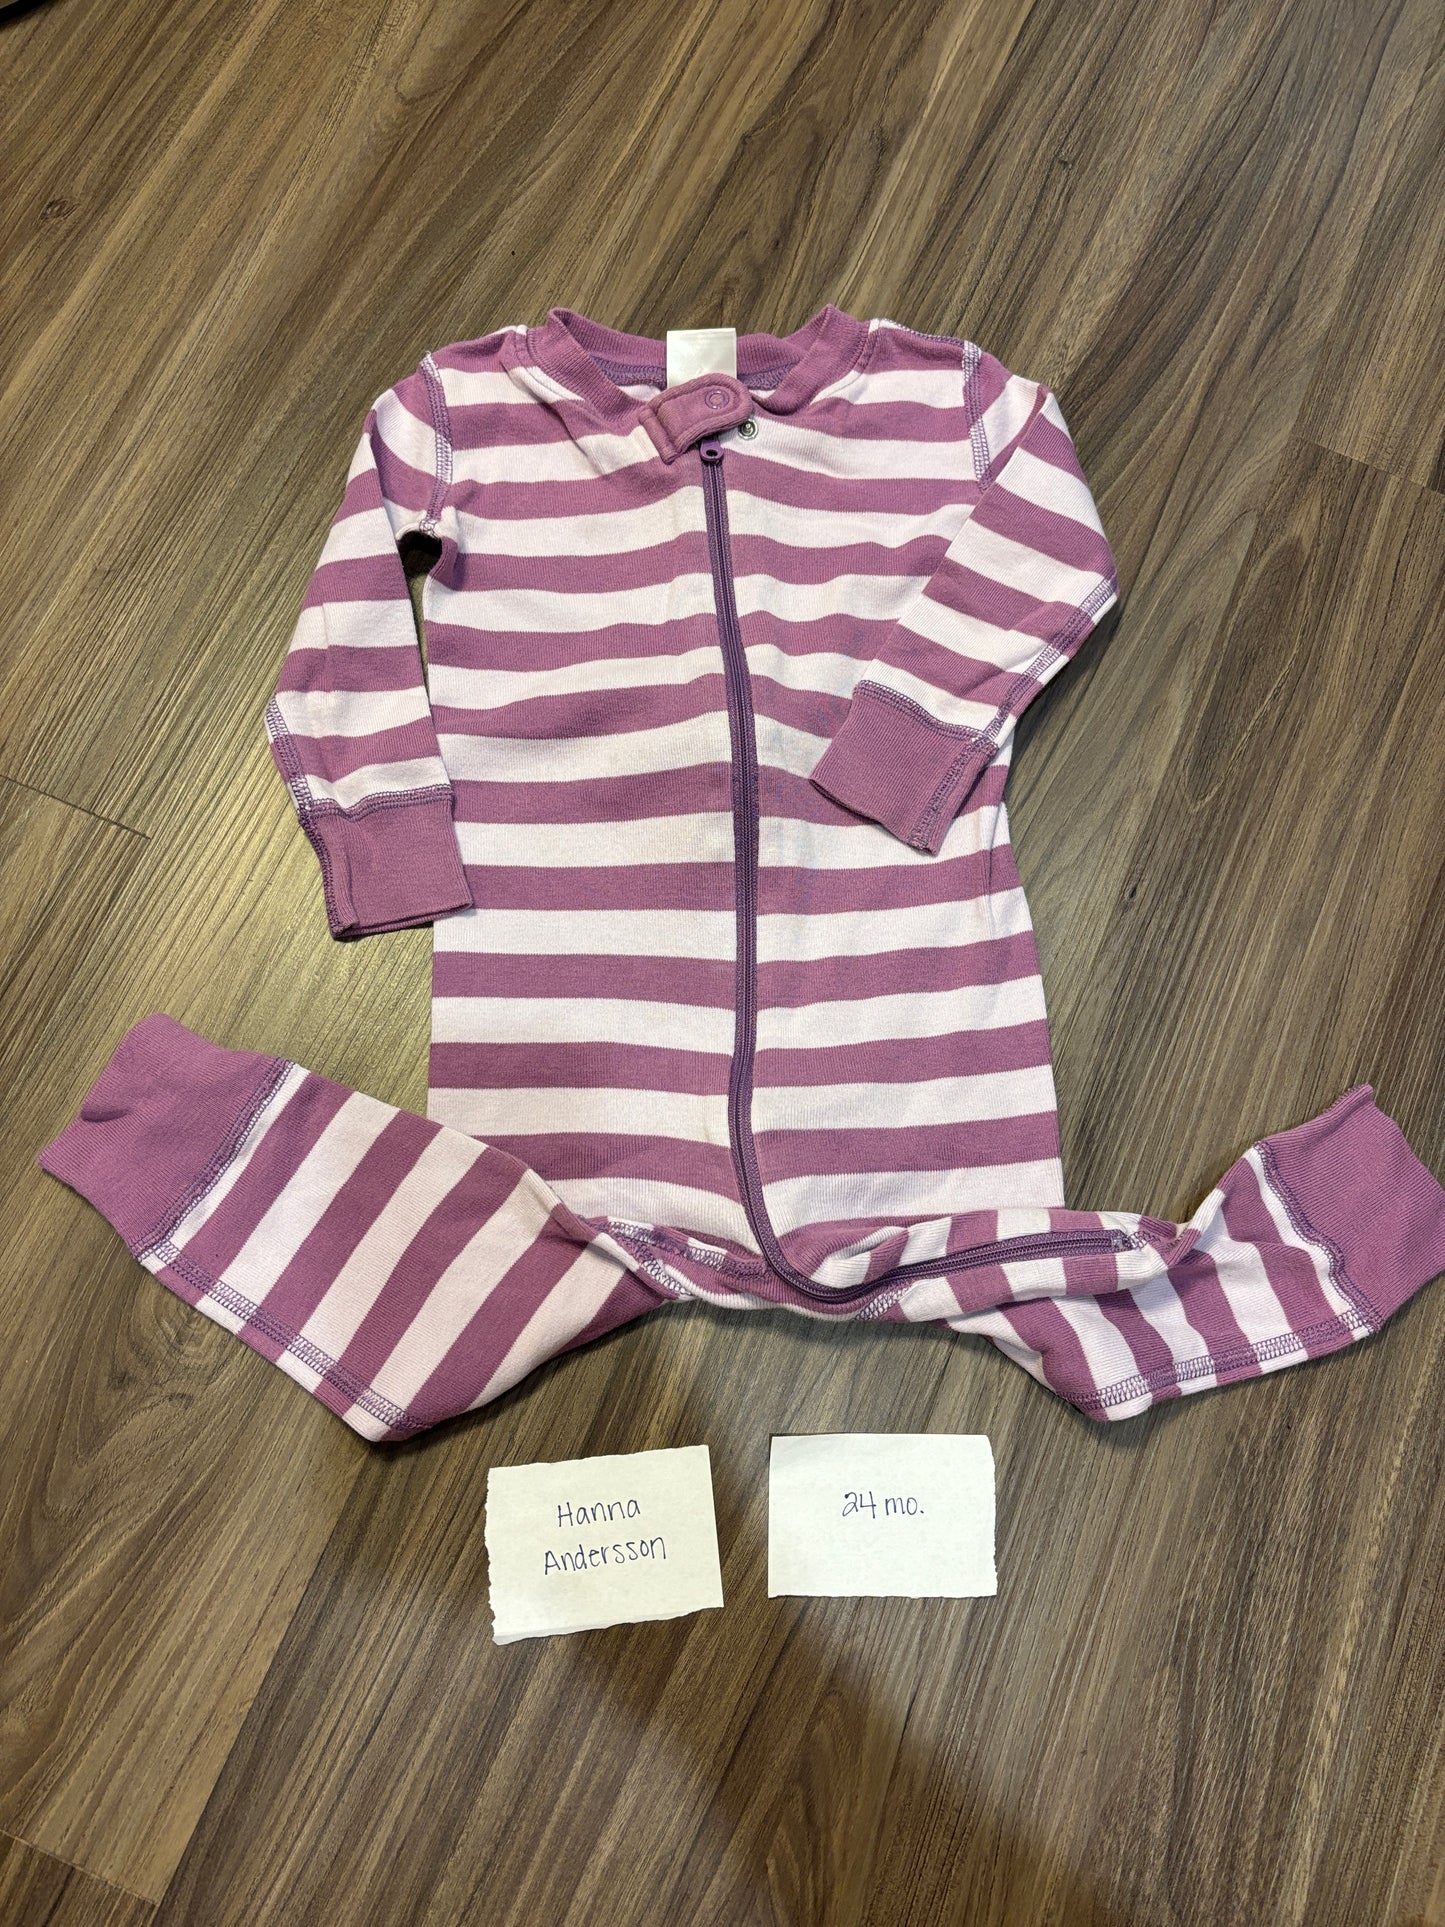 18-24 Mo - Hanna Andersson - Purple Striped Romper - PU 45236 (near Kenwood) Except Semiannual Sale